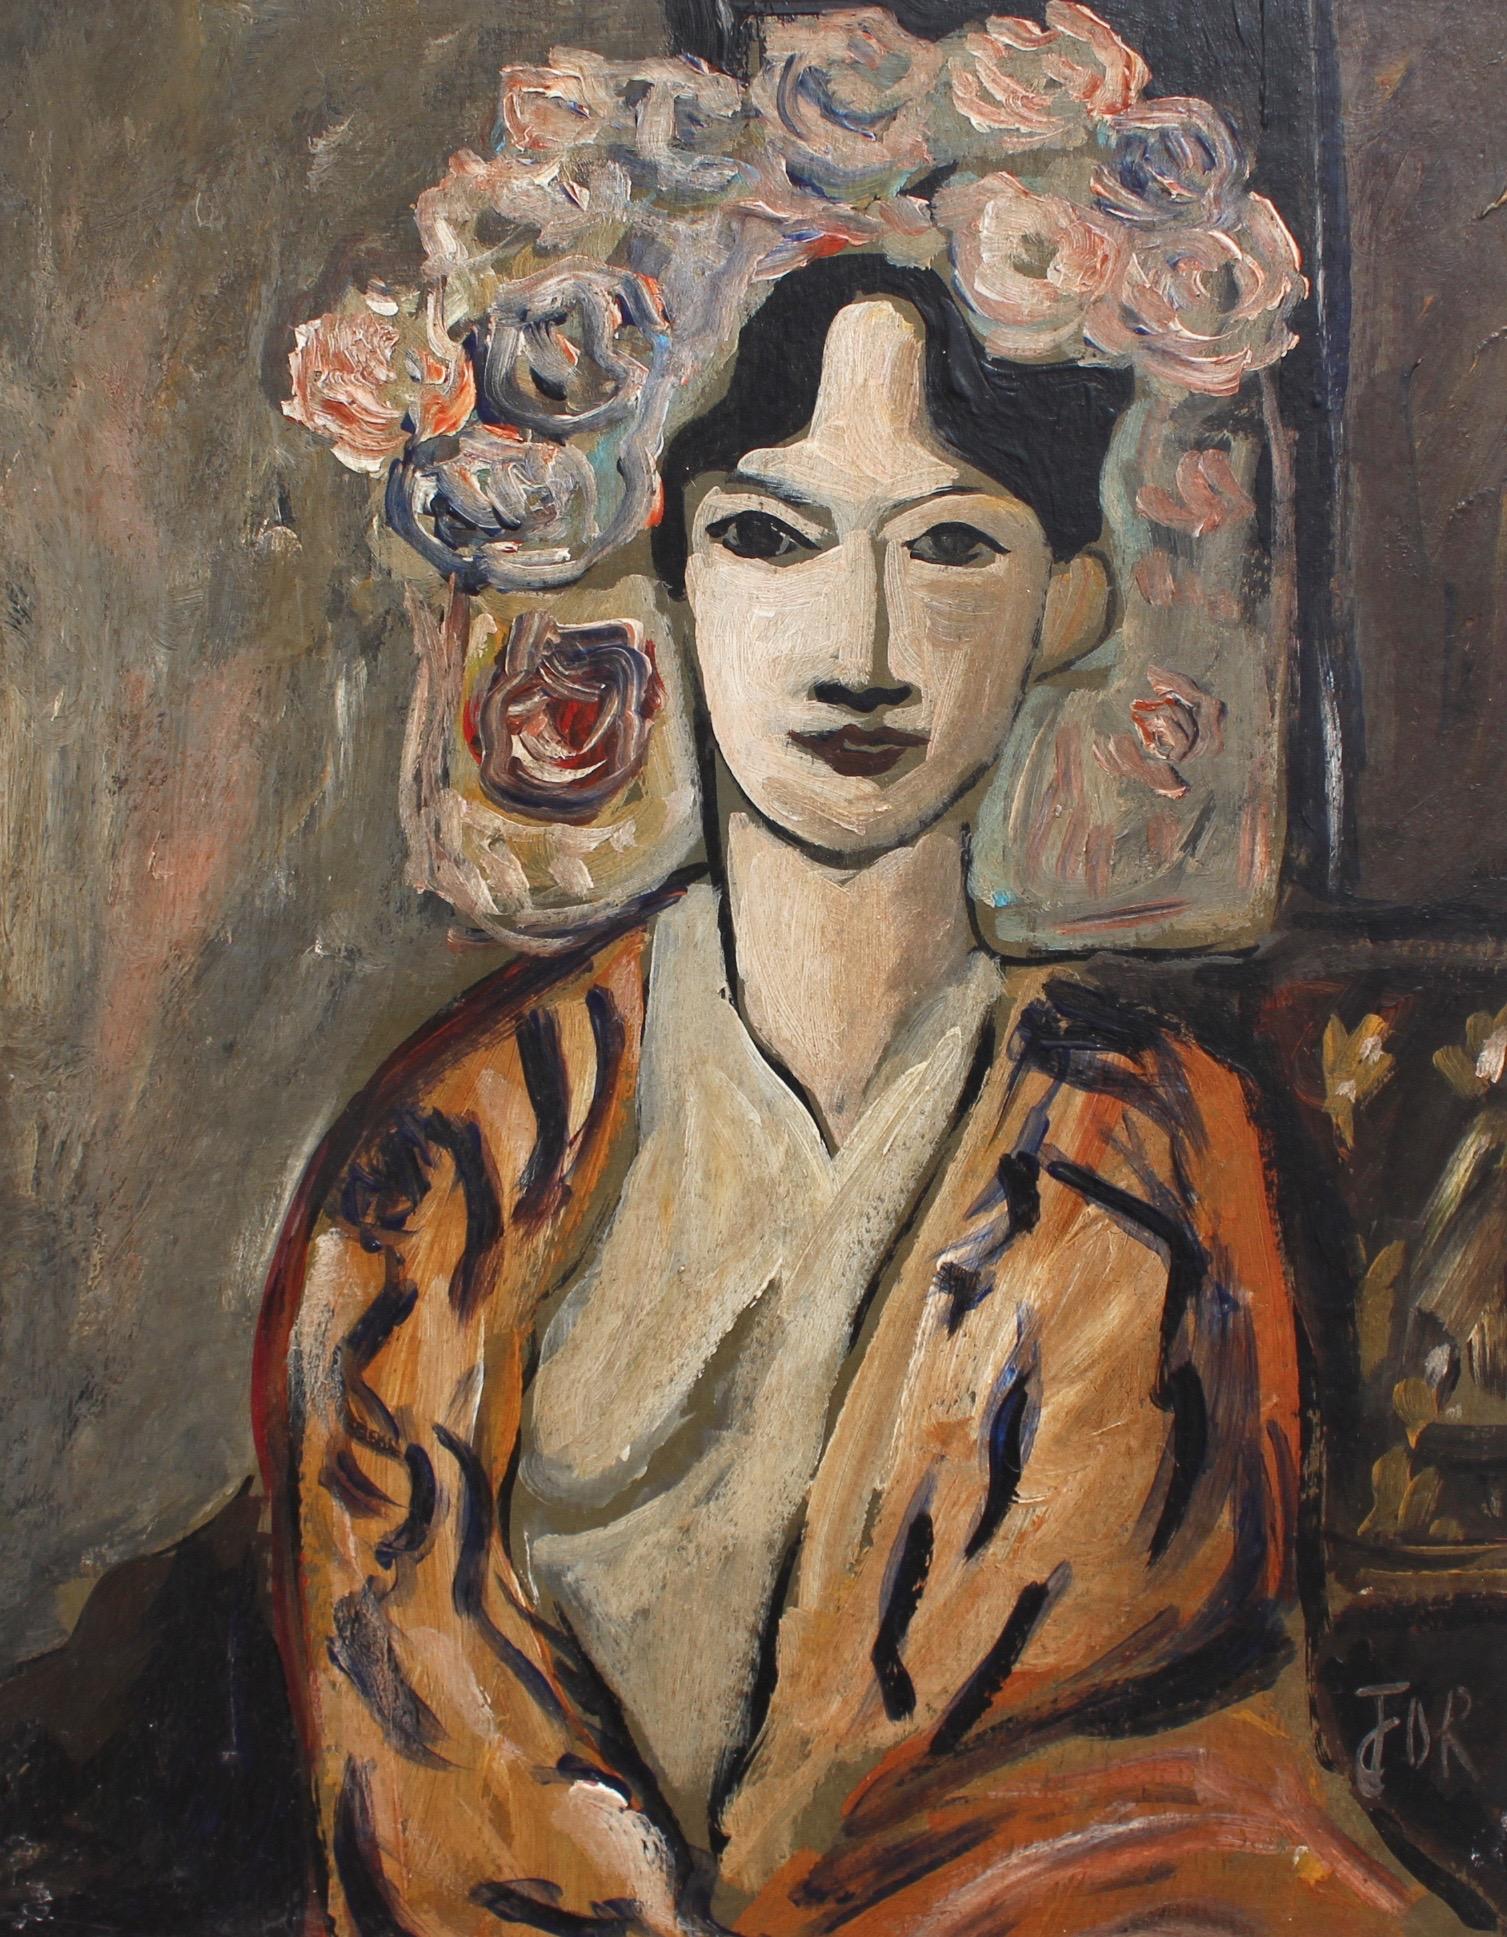 Unknown Figurative Painting -  F.O.R., 'Flowered Woman in Robe', Midcentury Oil Portrait Painting, Berlin